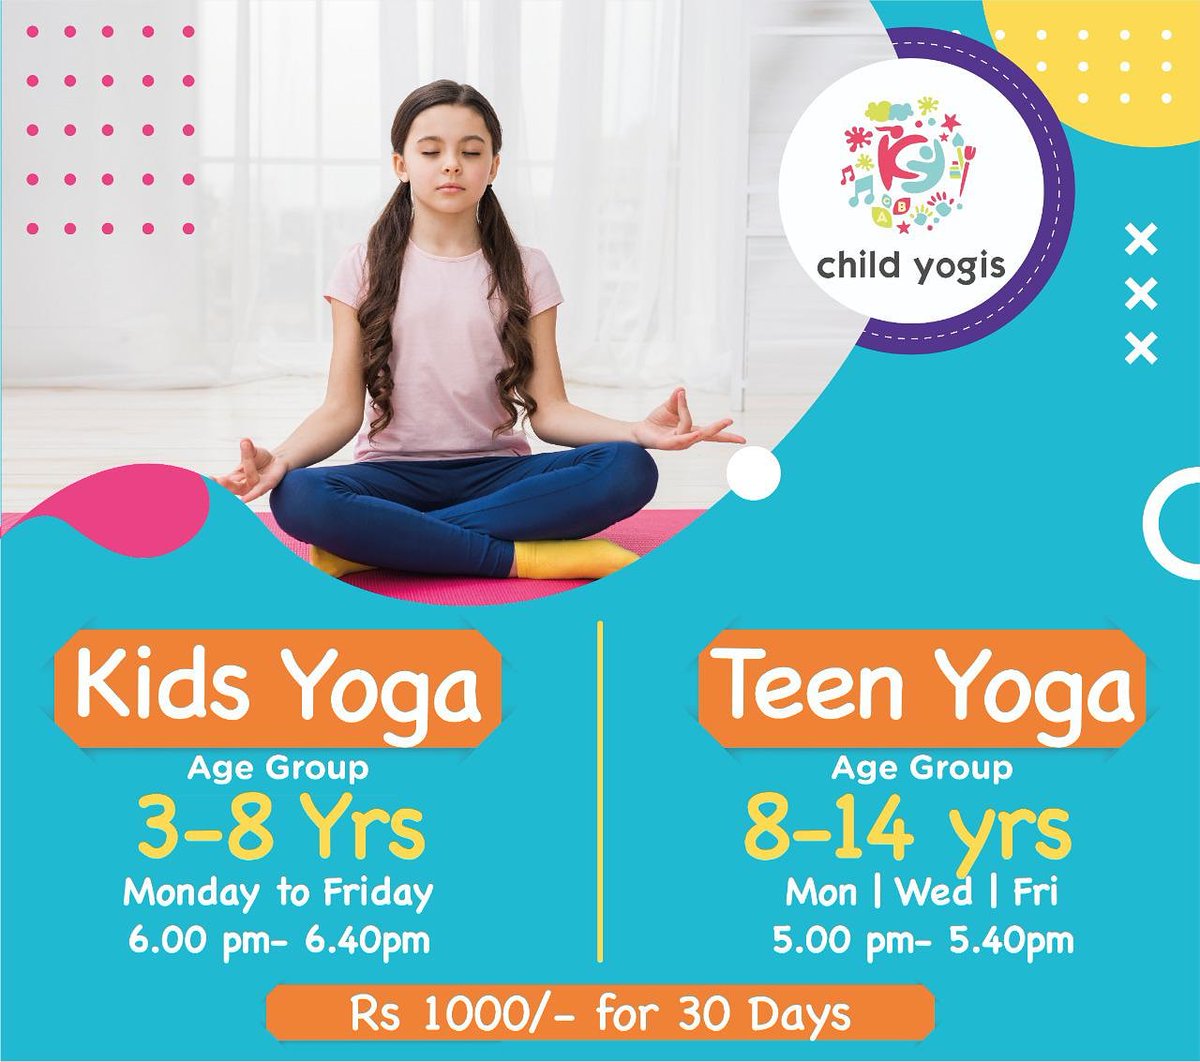 KIDS YOGA : bit.ly/39zz57s⁣
TEEN YOGA⁣⁣⁣ : bit.ly/3hI4bN7⁣
Check image to know more
#kidsokplease  #marvellouschildhoods #events #onlineevents #eventsforchildren #onlineworkshops #childhoodlearning #yoga #learnyoga #childyogis #interactiveyoga #yogaforkids